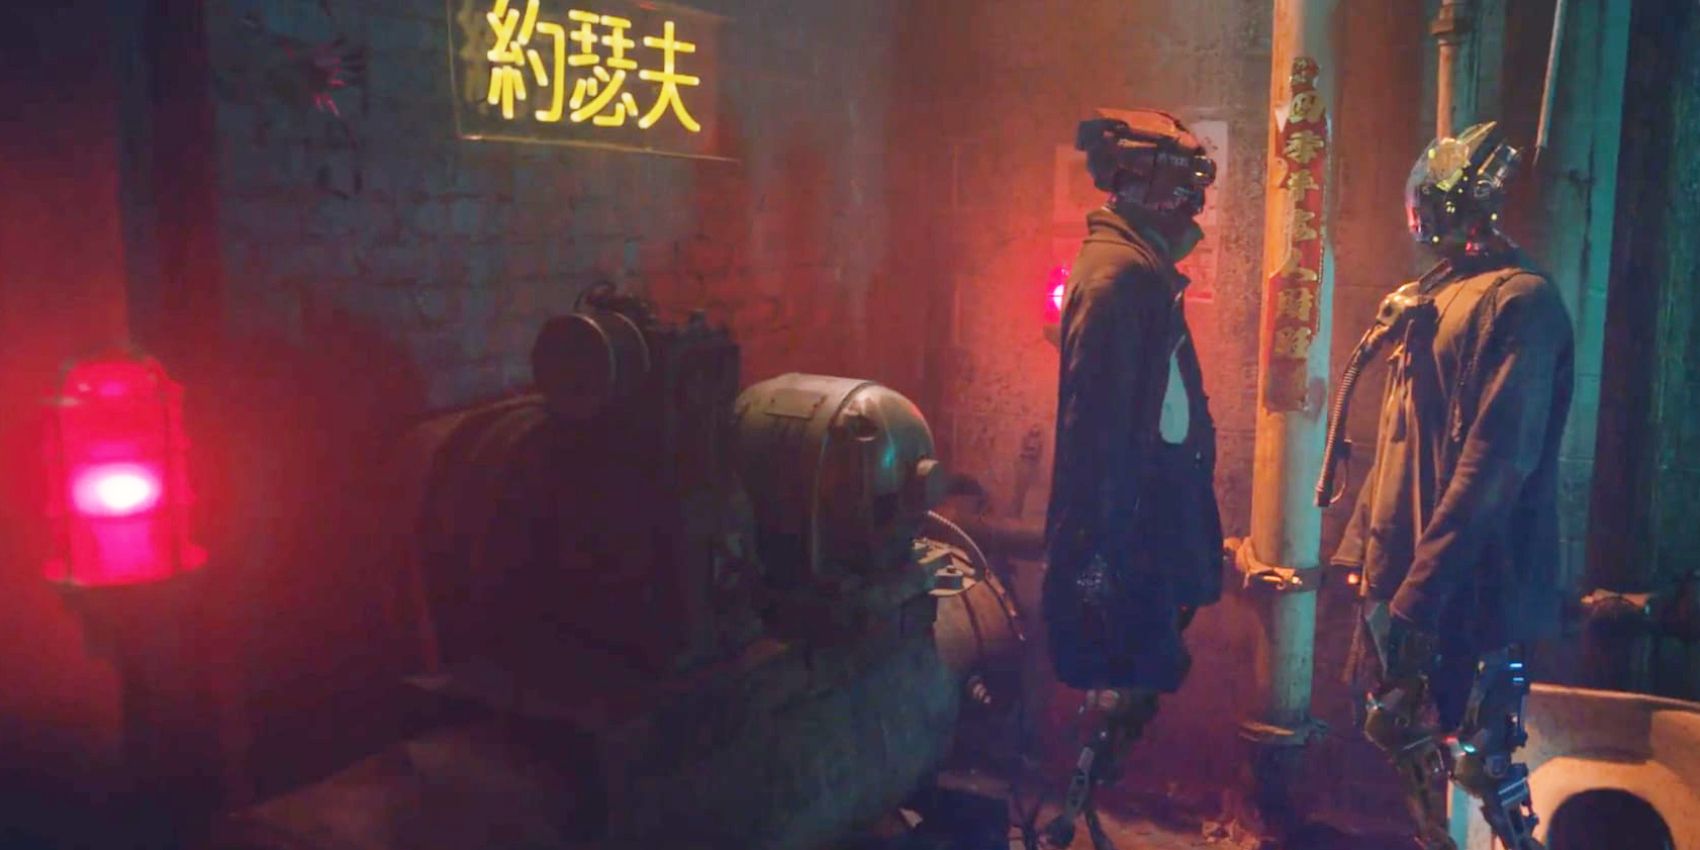 Joseph written in Chinese text in Ready For it video.